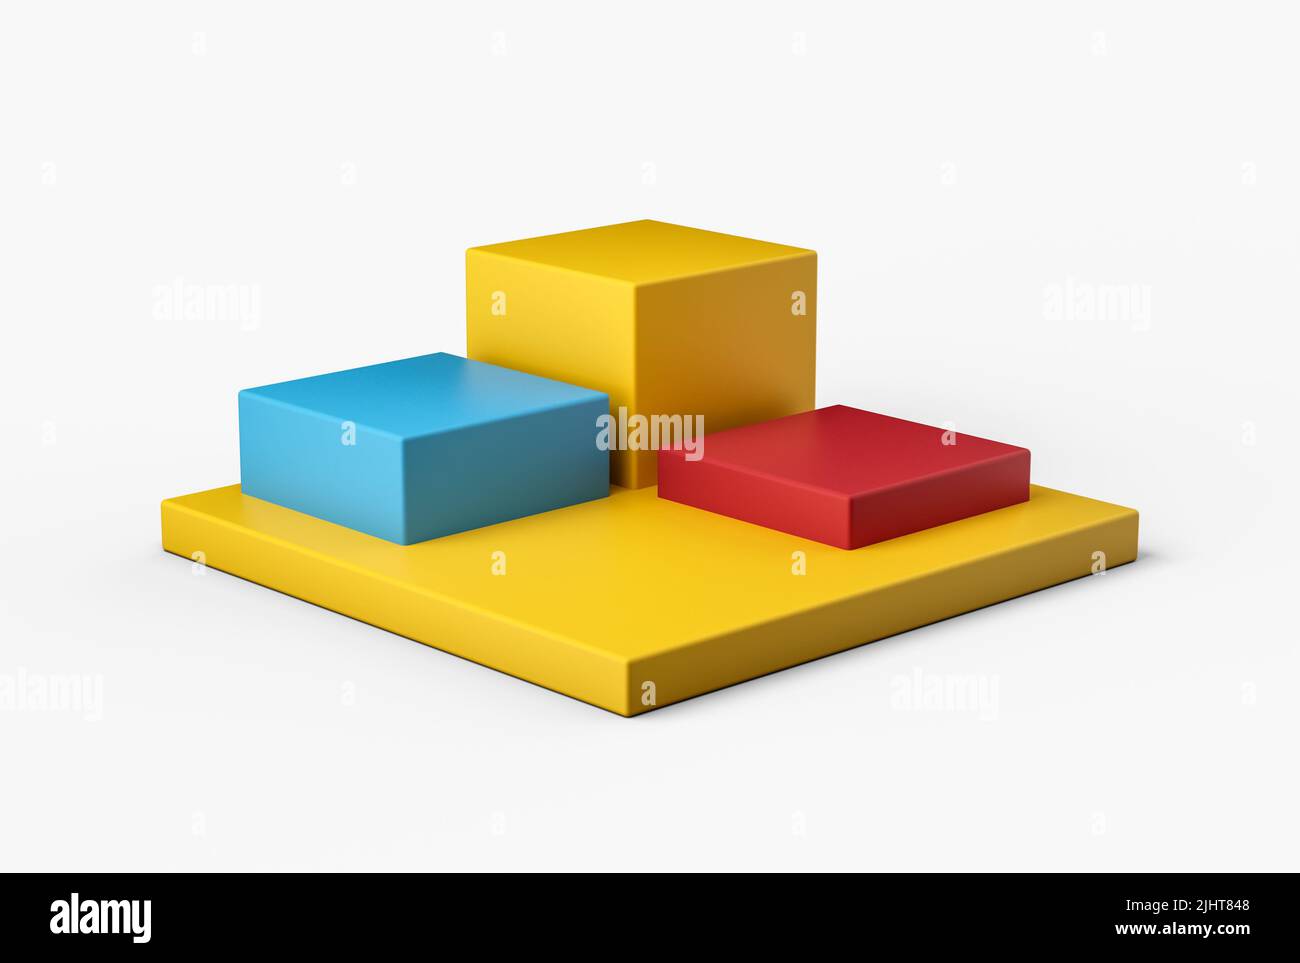 A 3d illustration of the cube podium on the white platform Stock Photo